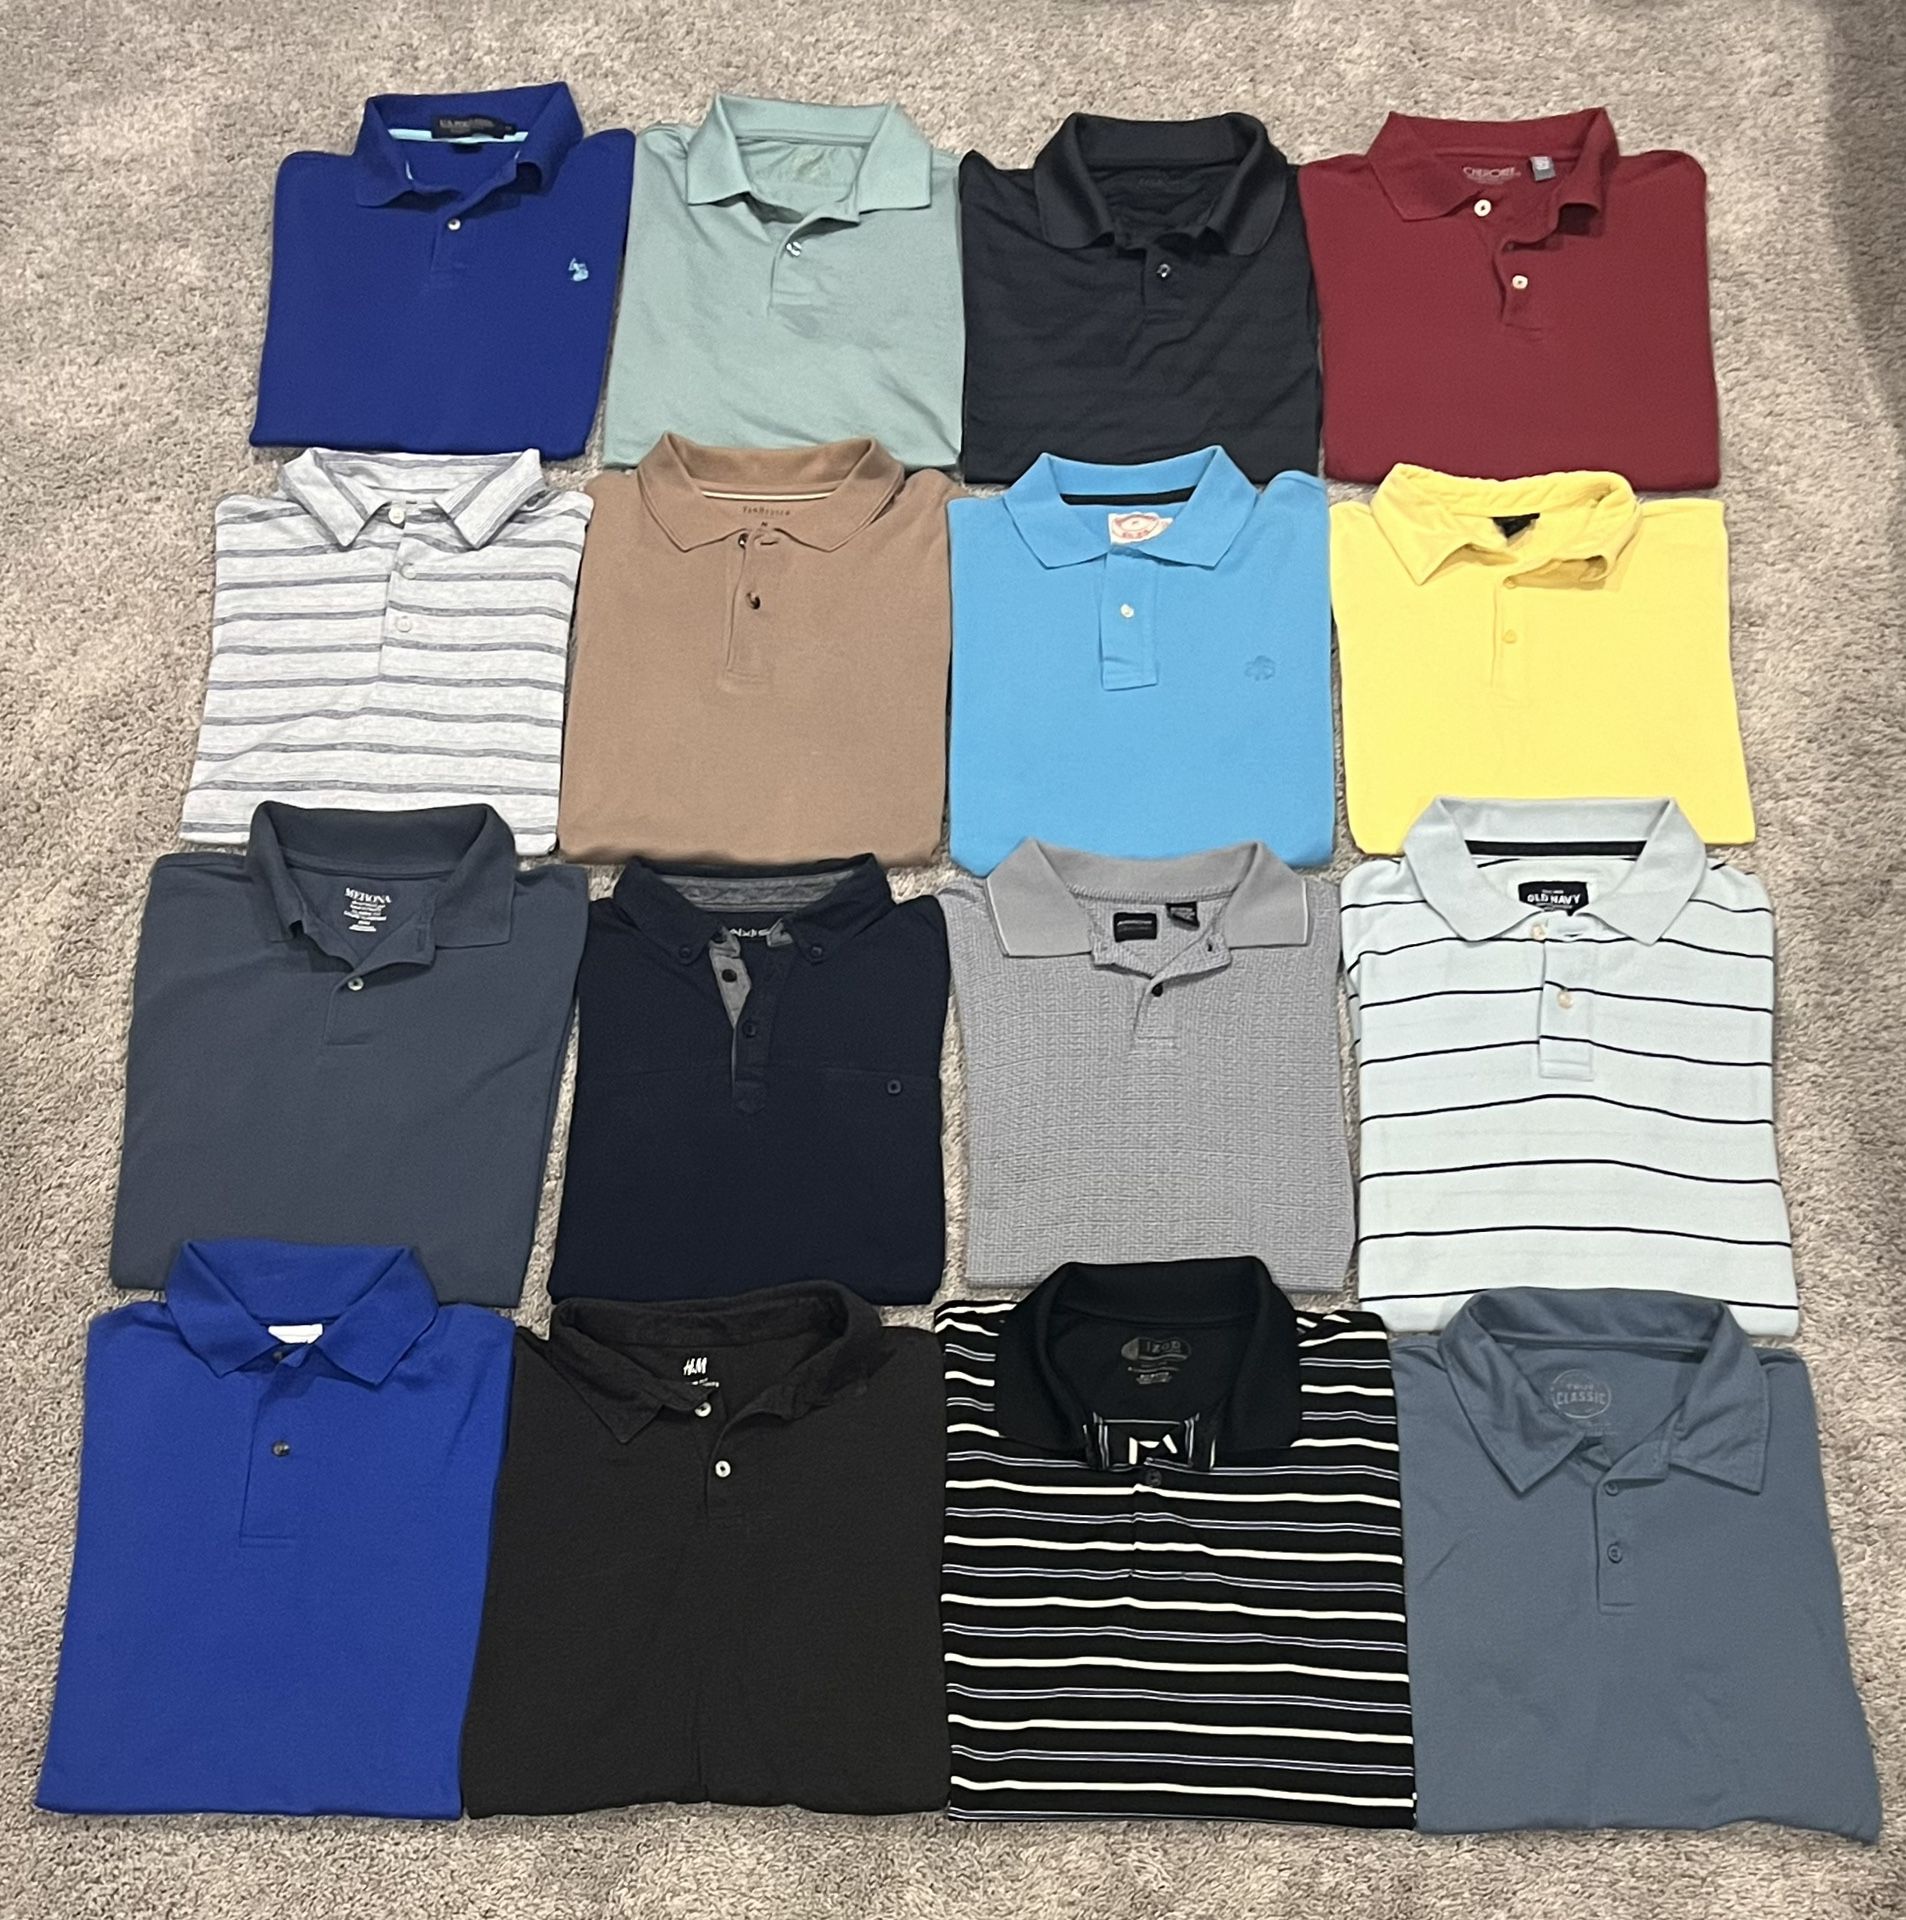 Lot of Qty 21 Men’s Size Medium Short Sleeve Casual Polo Shirts Various Color & Brands in Classic and Mesh Style